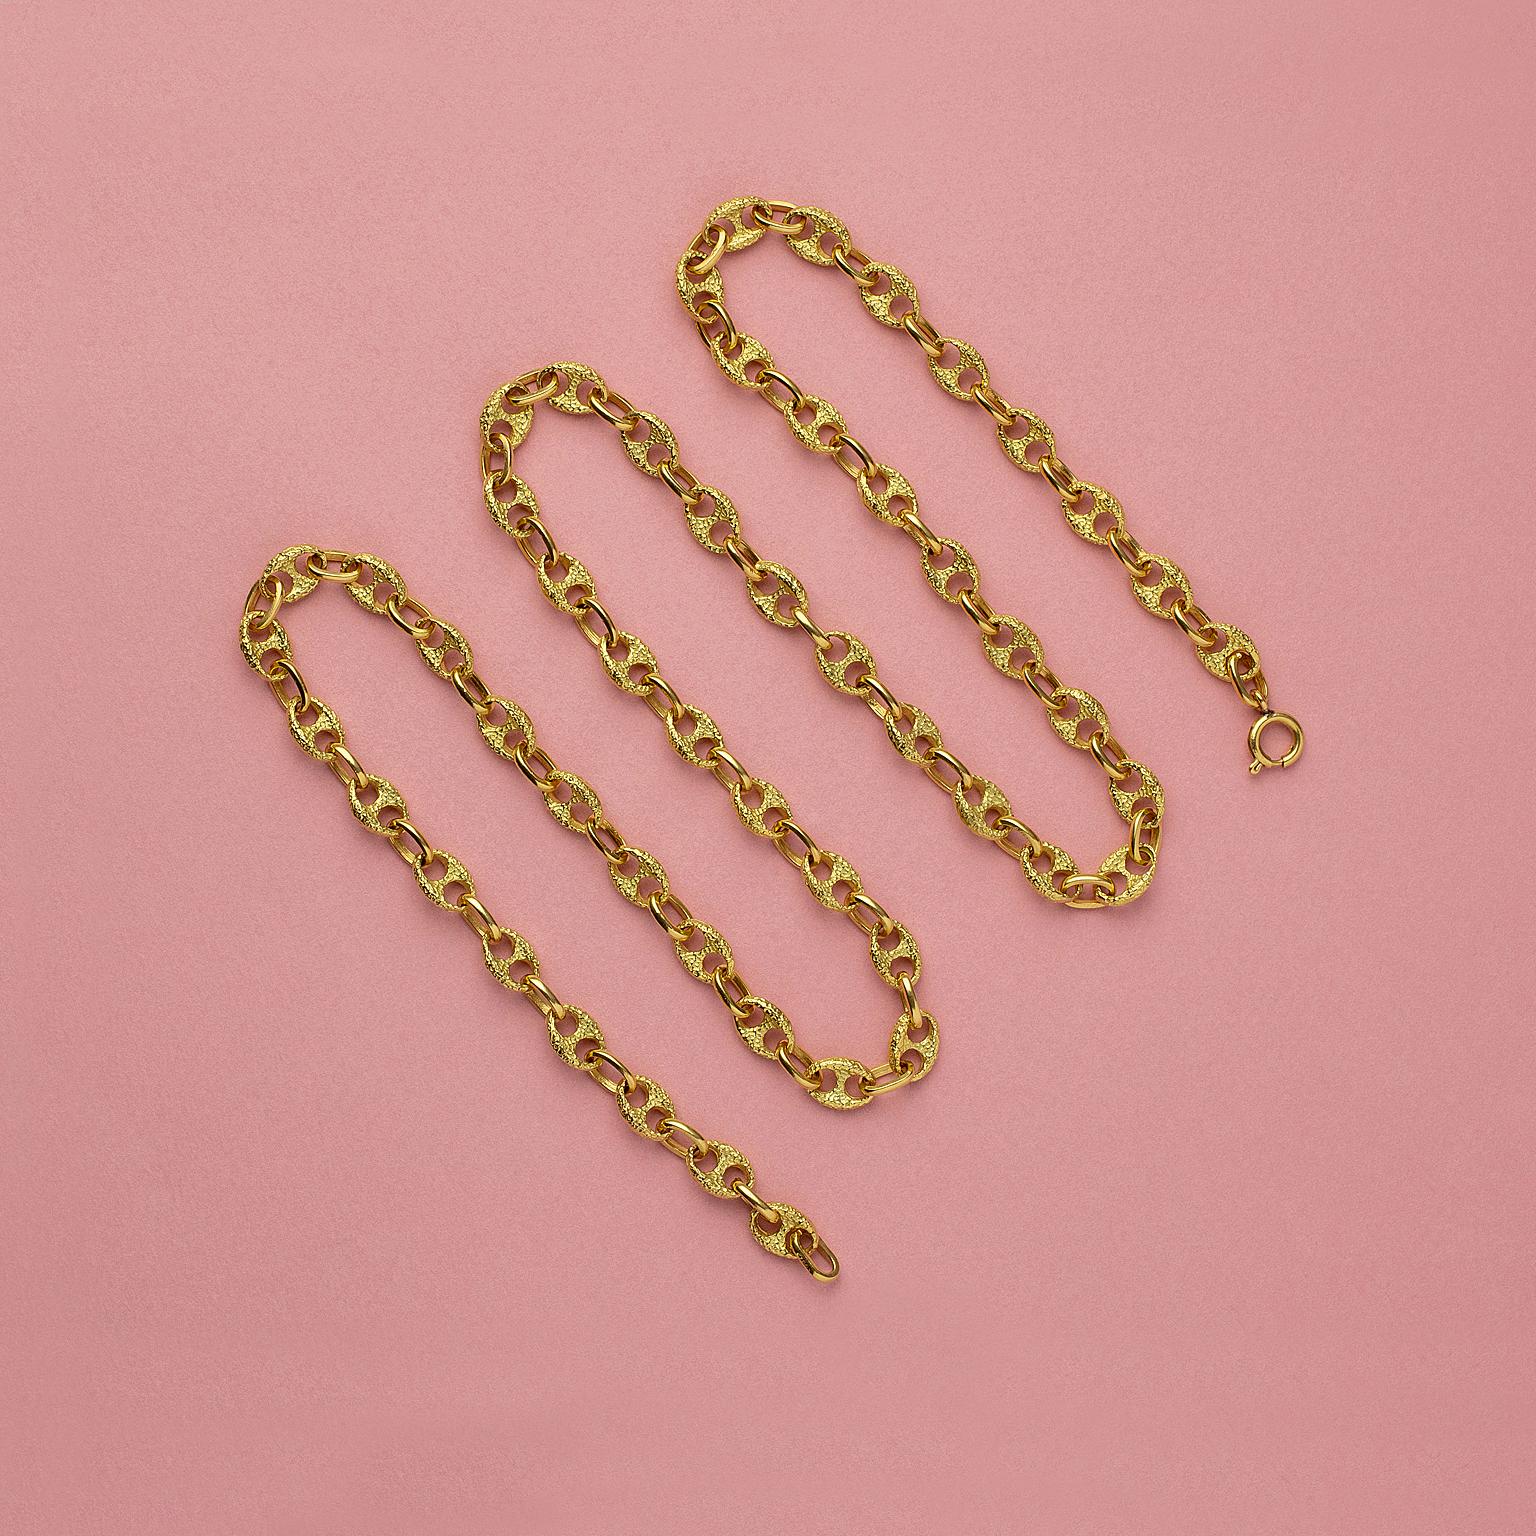 An 18 carat gold mariner chain with textured and polished links, Italian, circa 1970.

weight: 64.86 grams
length: 71.5 cm